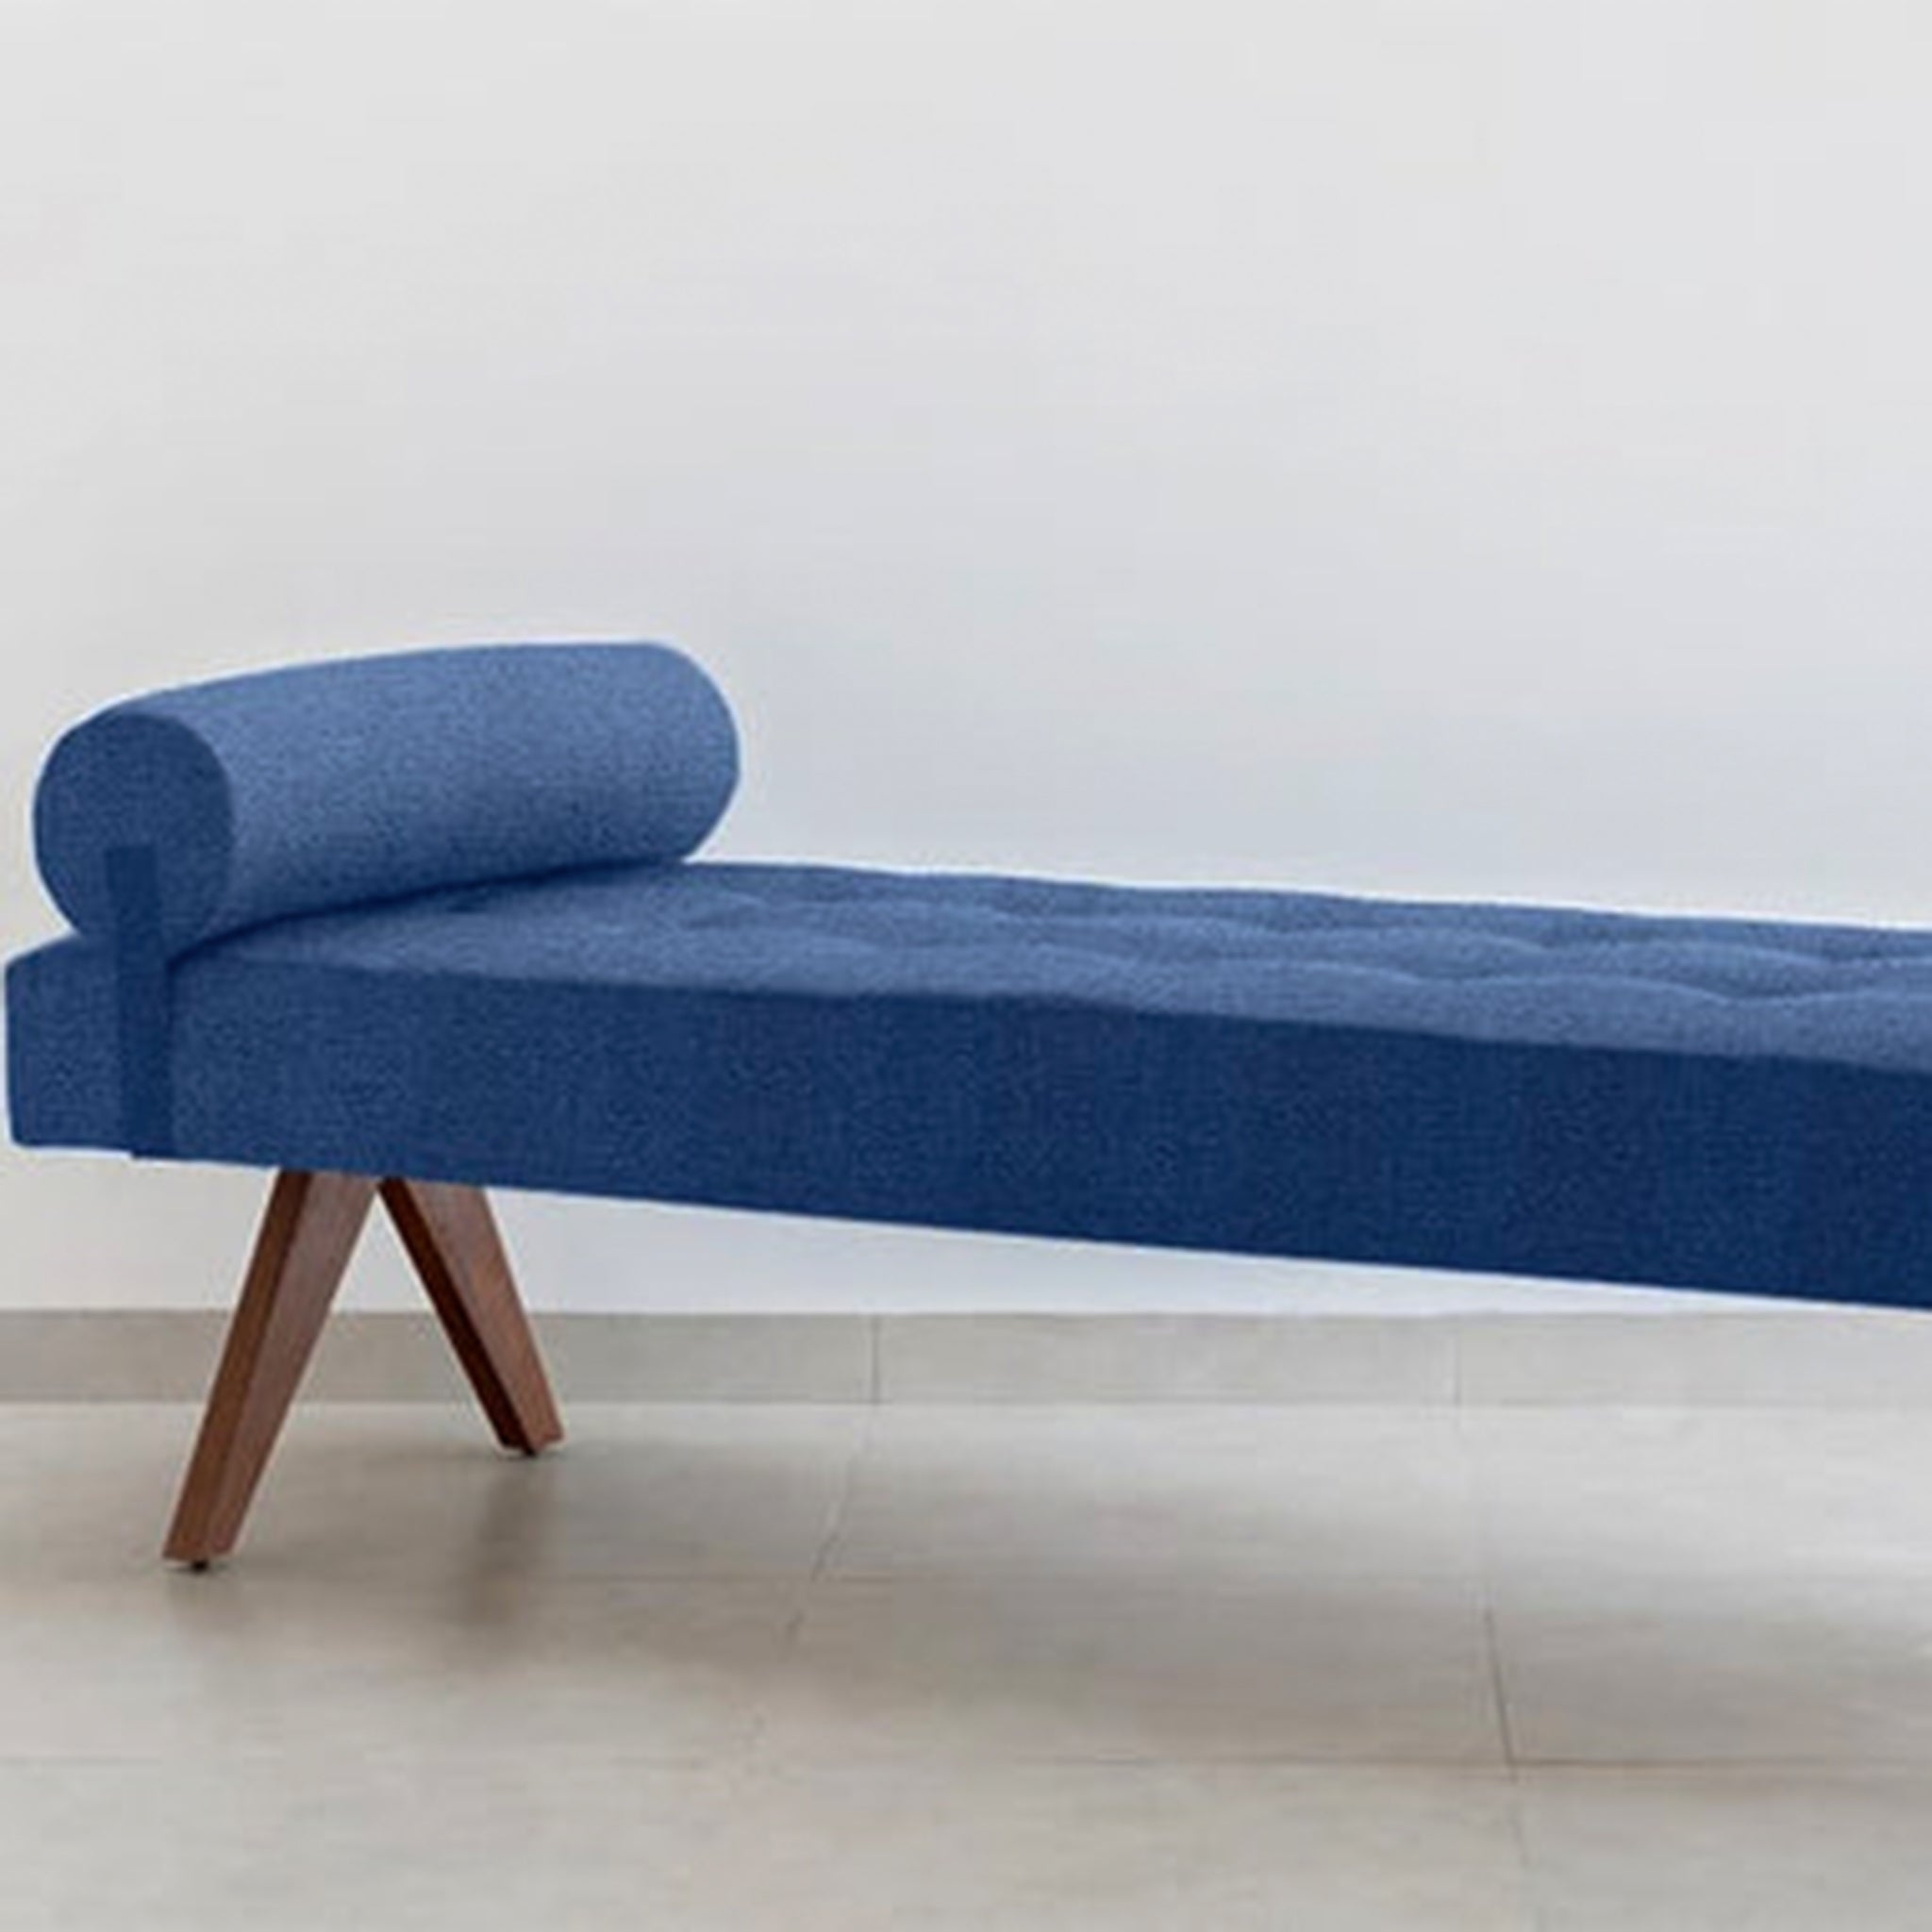 The Jack Daybed with a minimalist aesthetic